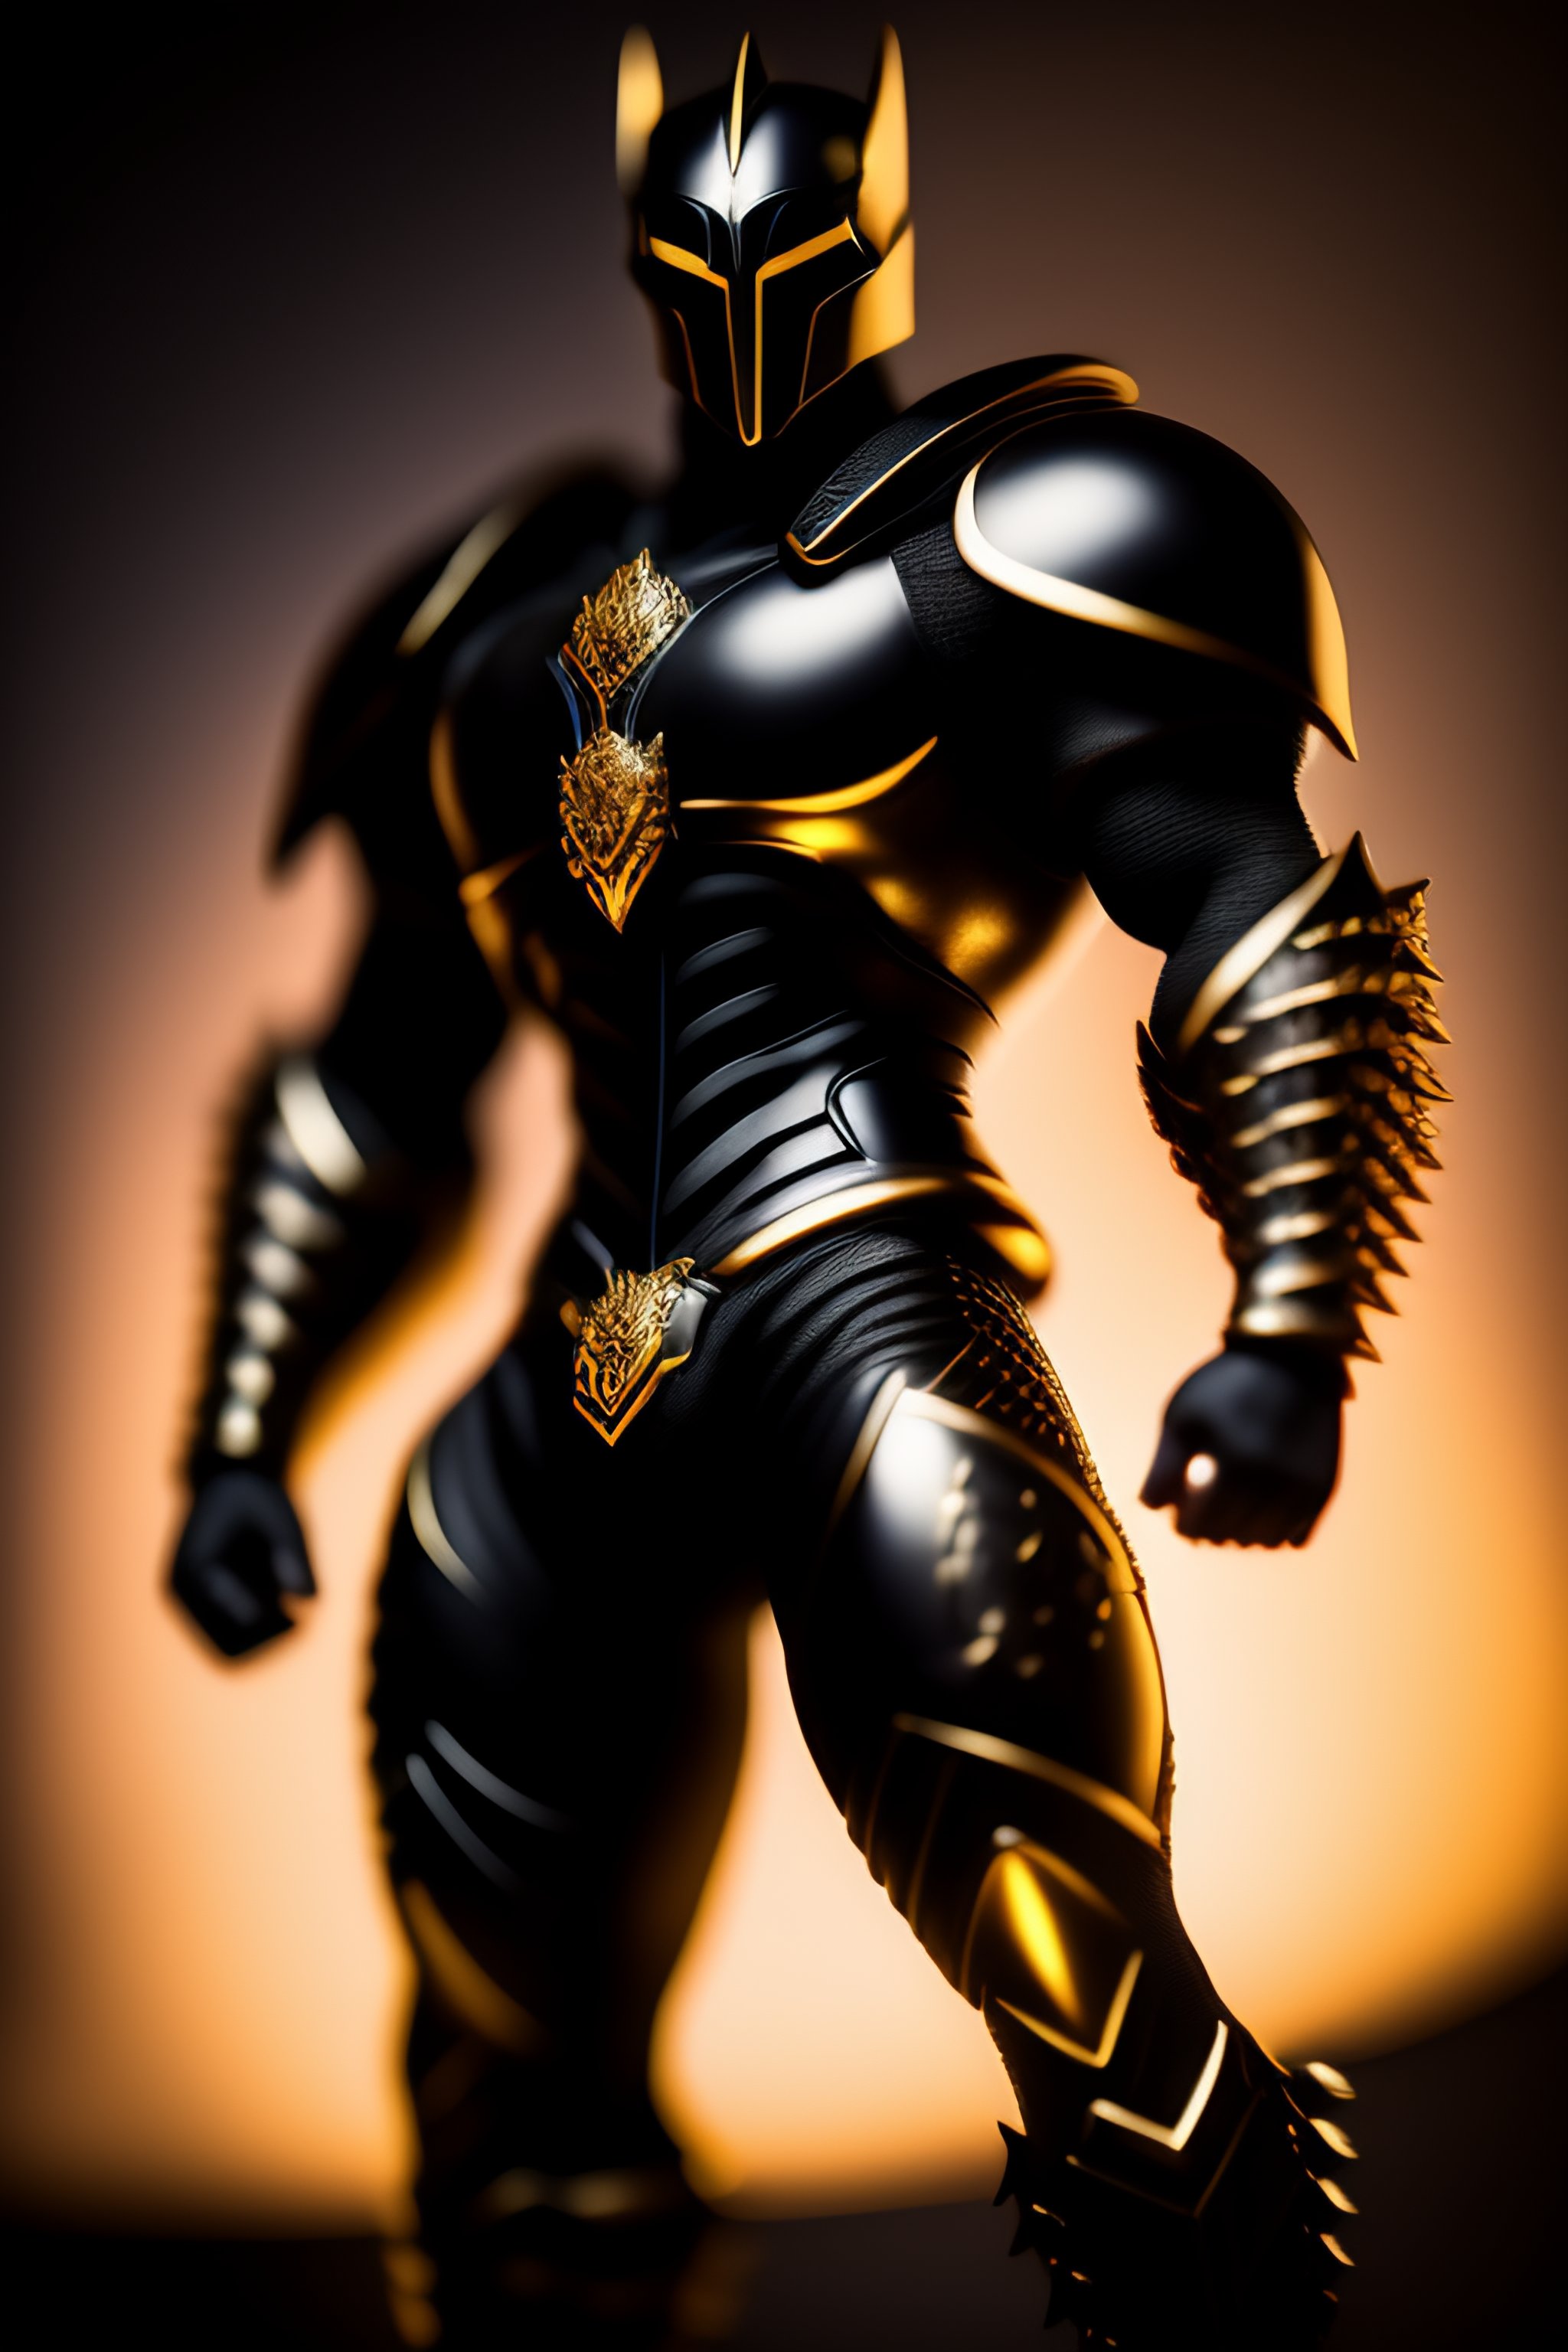 infinity blade concept art, armor, black and gold